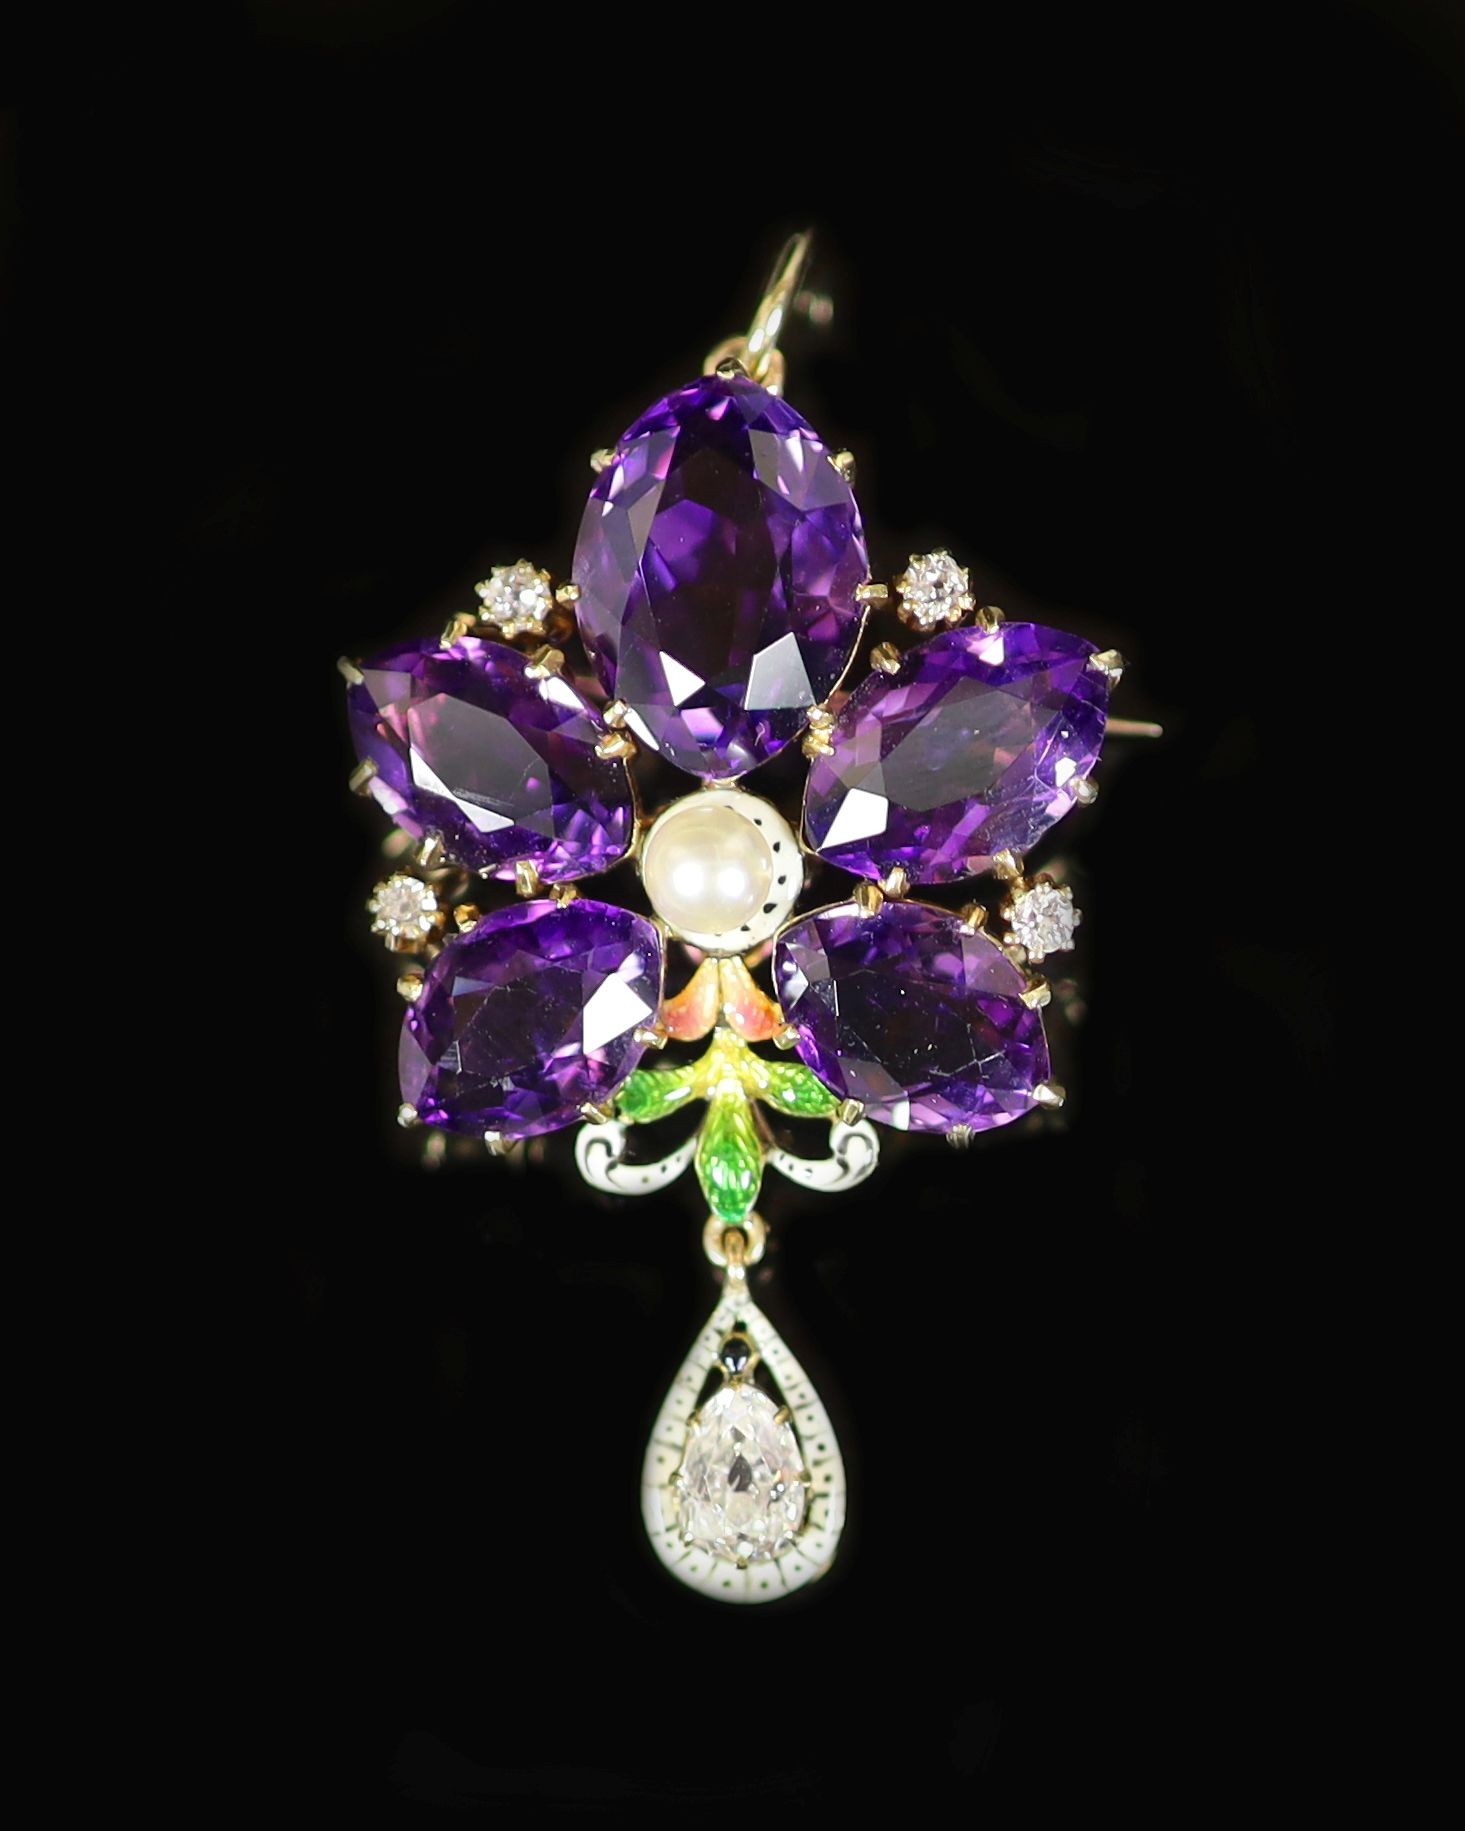 An early 20th century style continental gold, amethyst, seed pearl, enamel and diamond drop pendant brooch